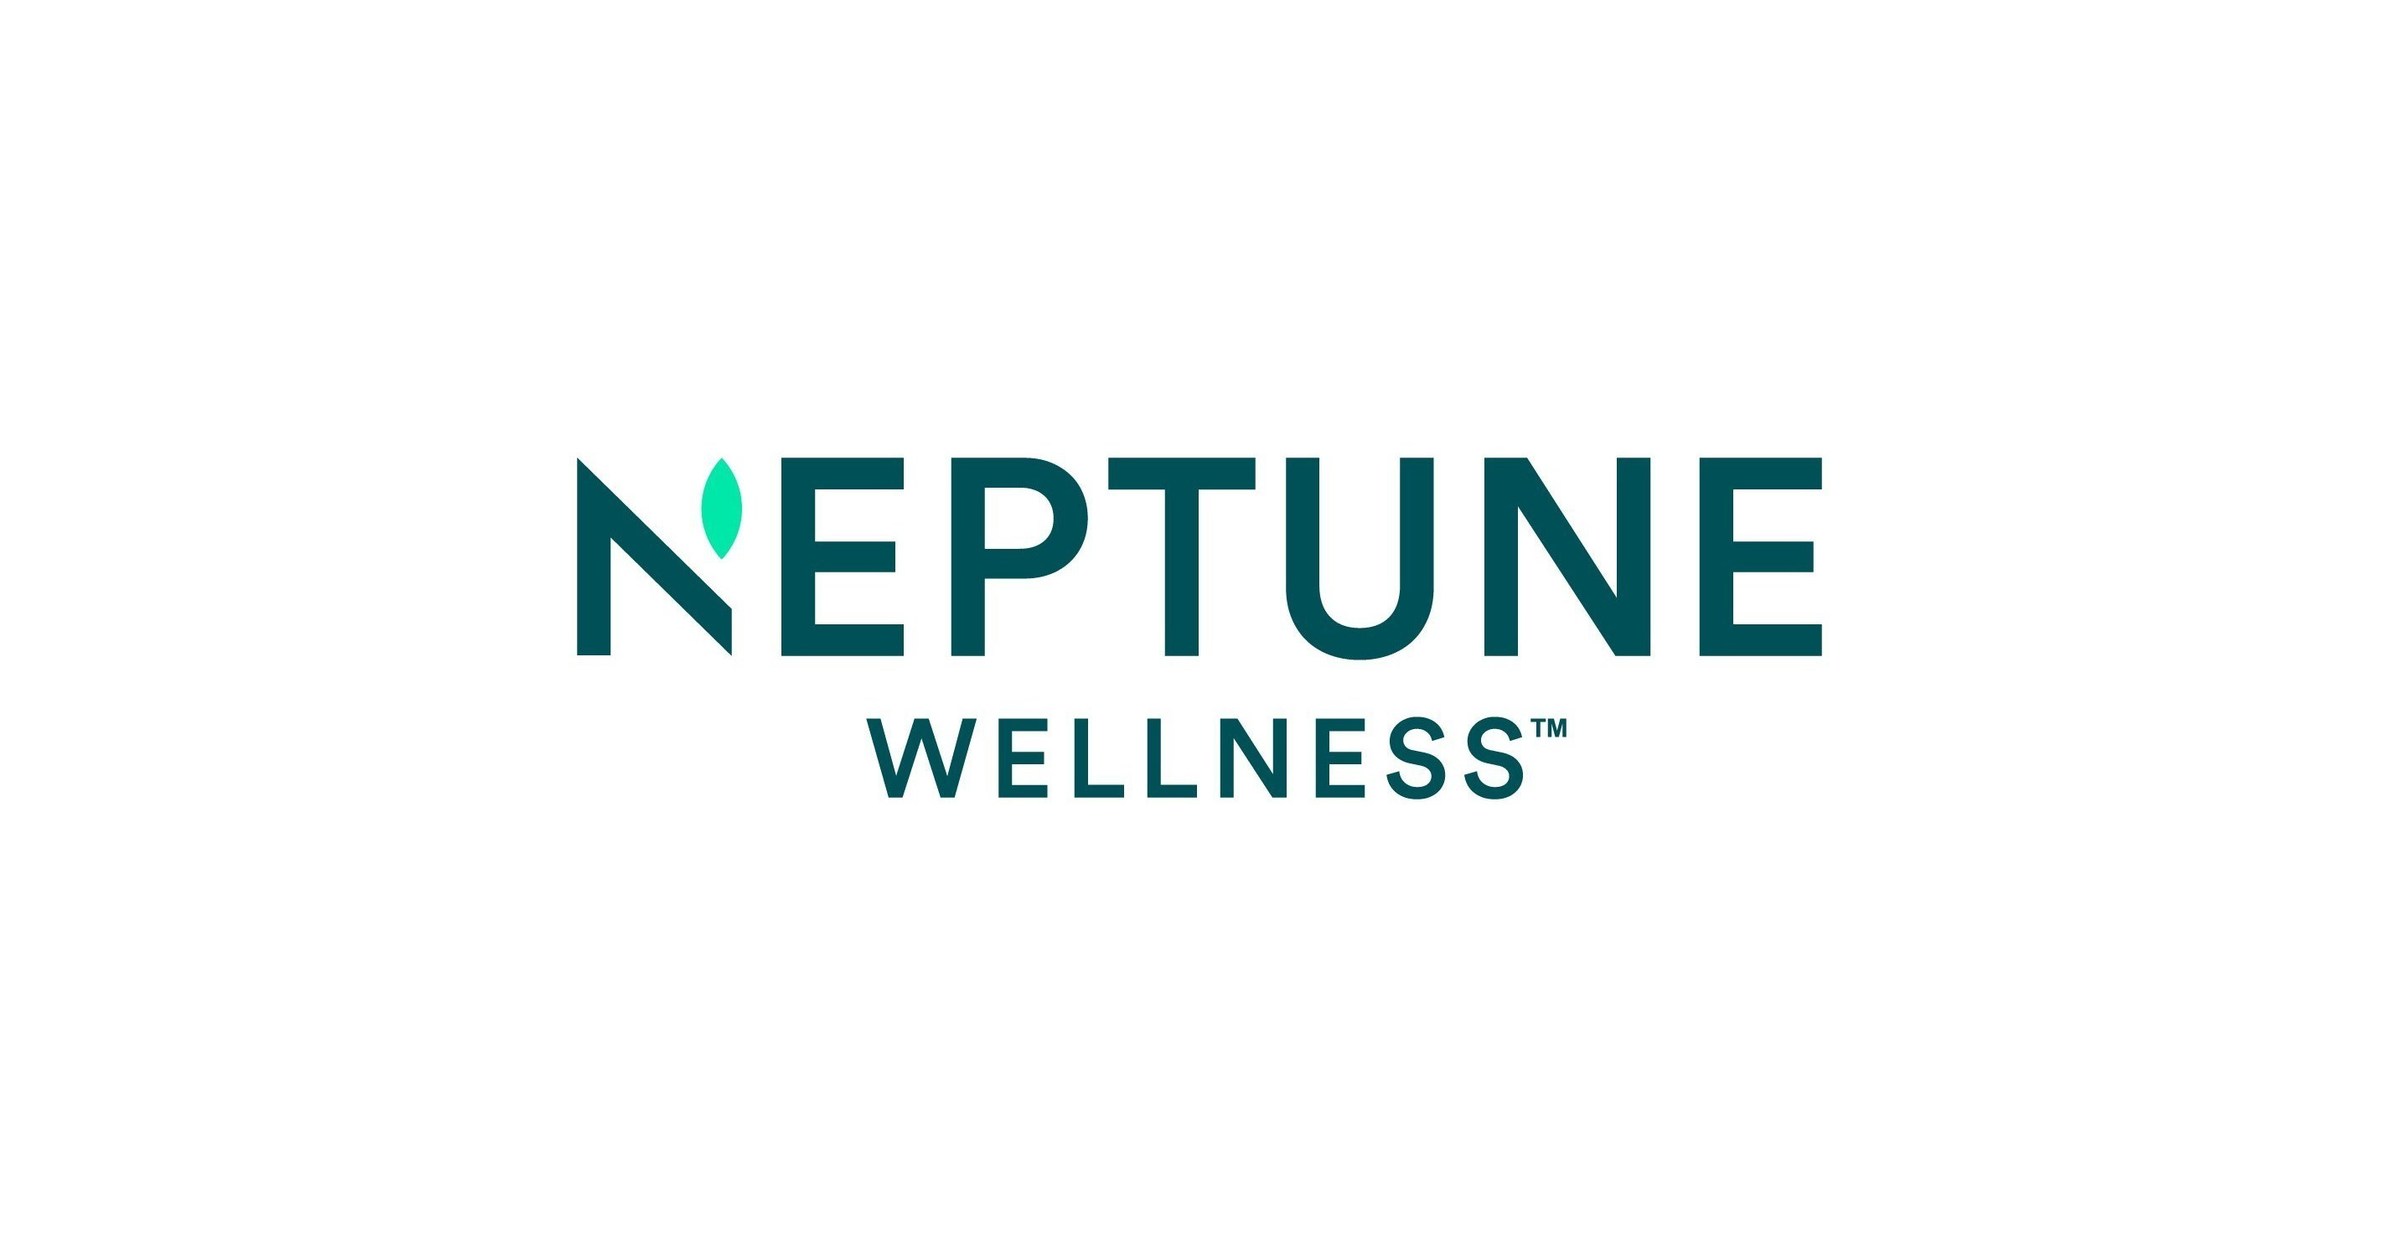 Neptune Wellness Solutions Inc.  announces a direct registered placement of US $ 8,000,000